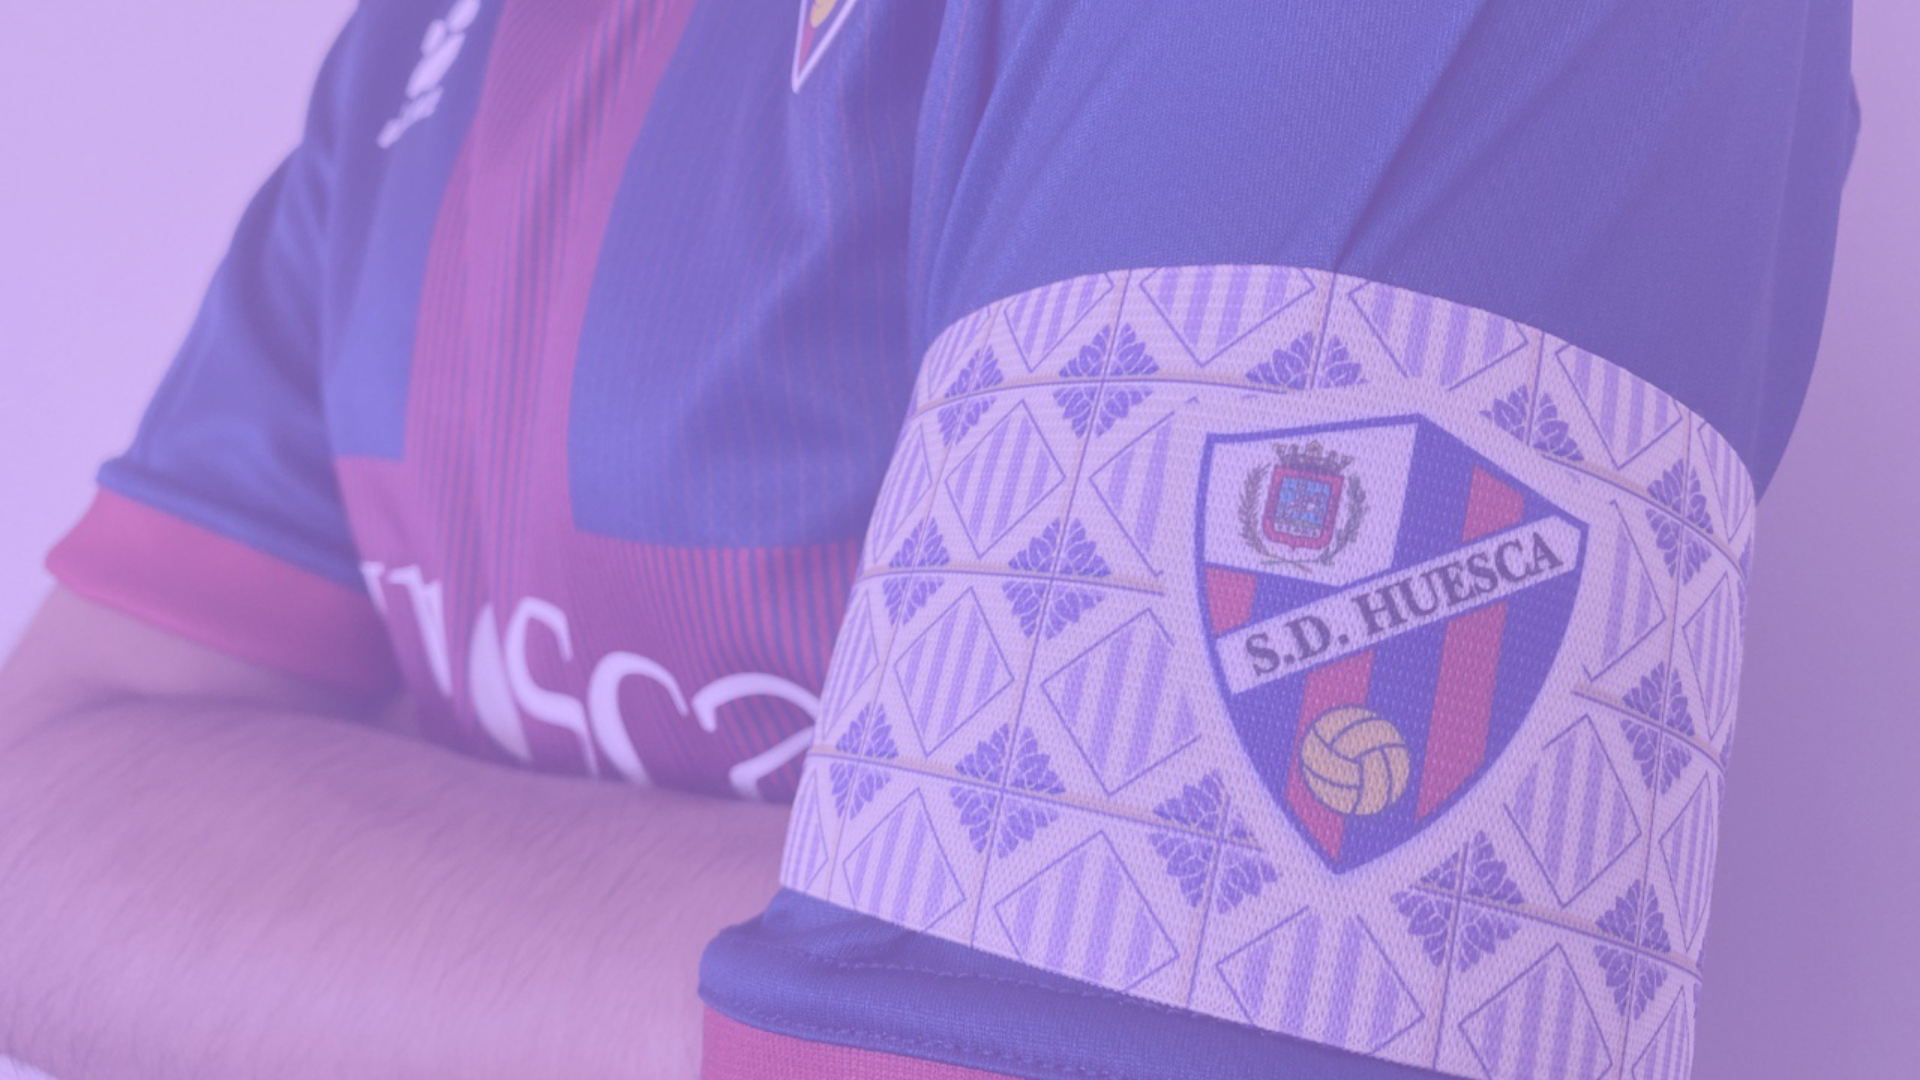 SD Huesca have the best captain’s armbands in football